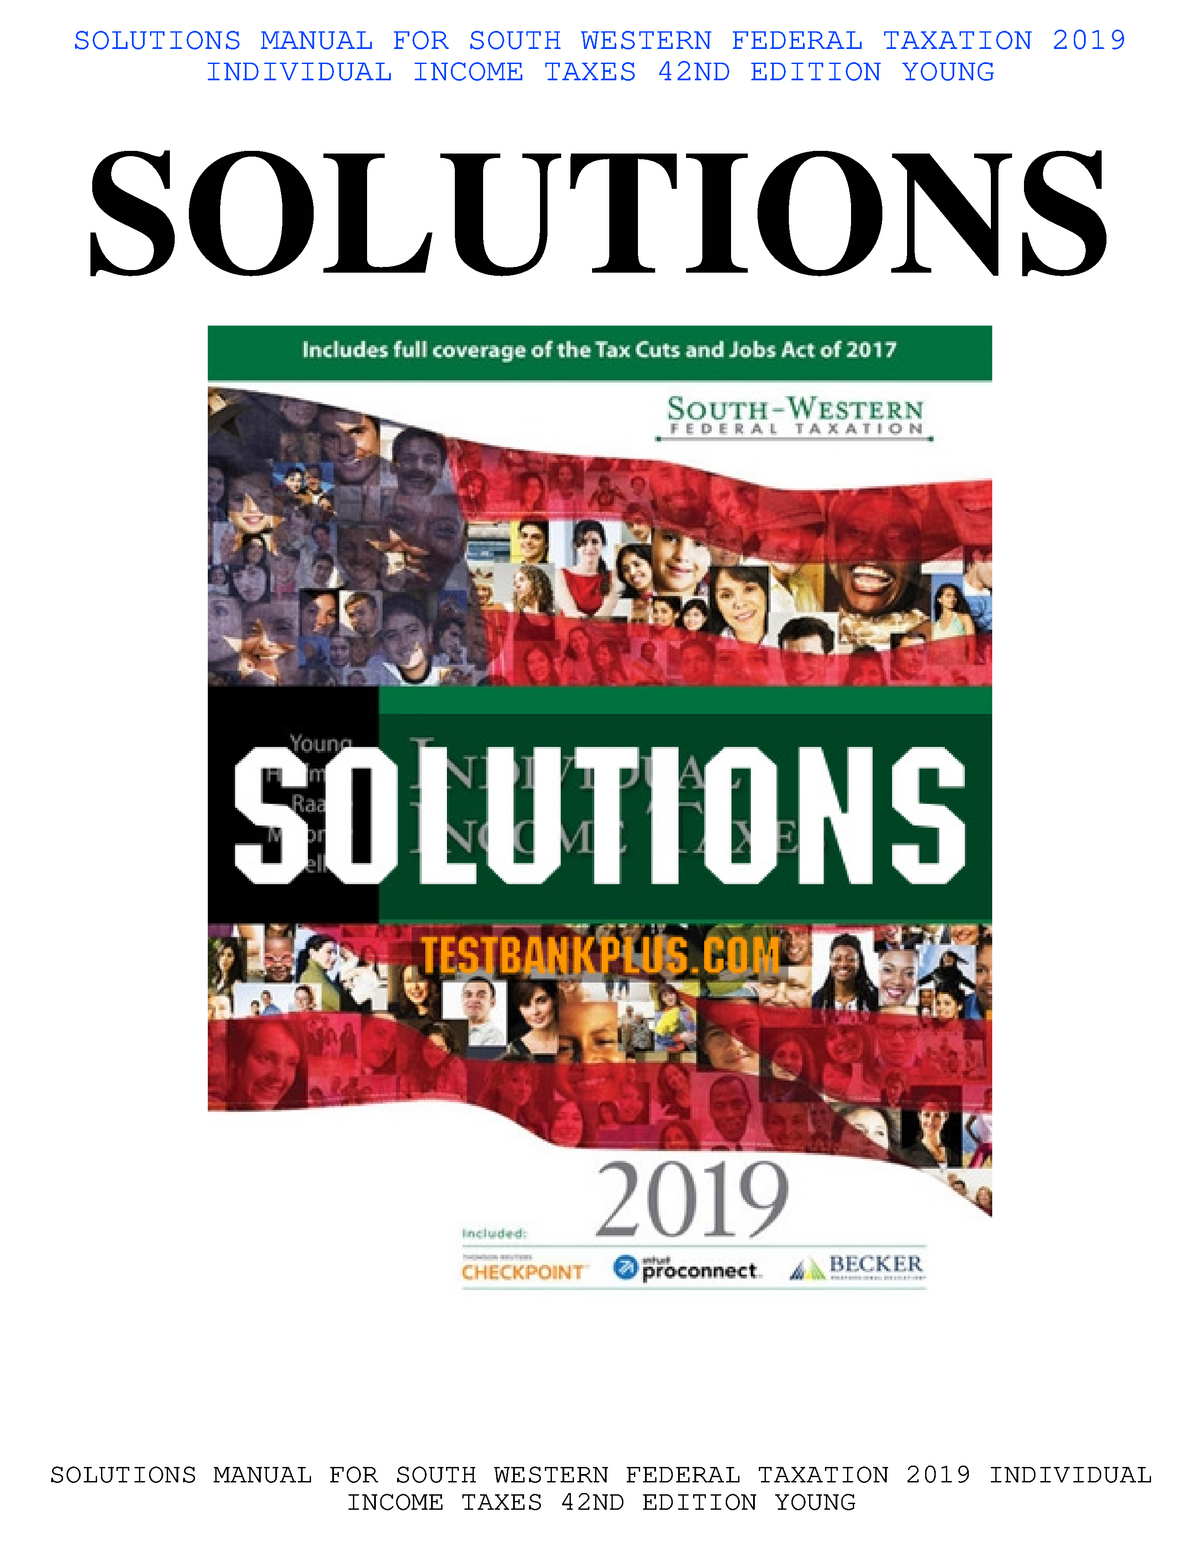 Solutions Manual for South Western Federal Taxation 2019 Individual